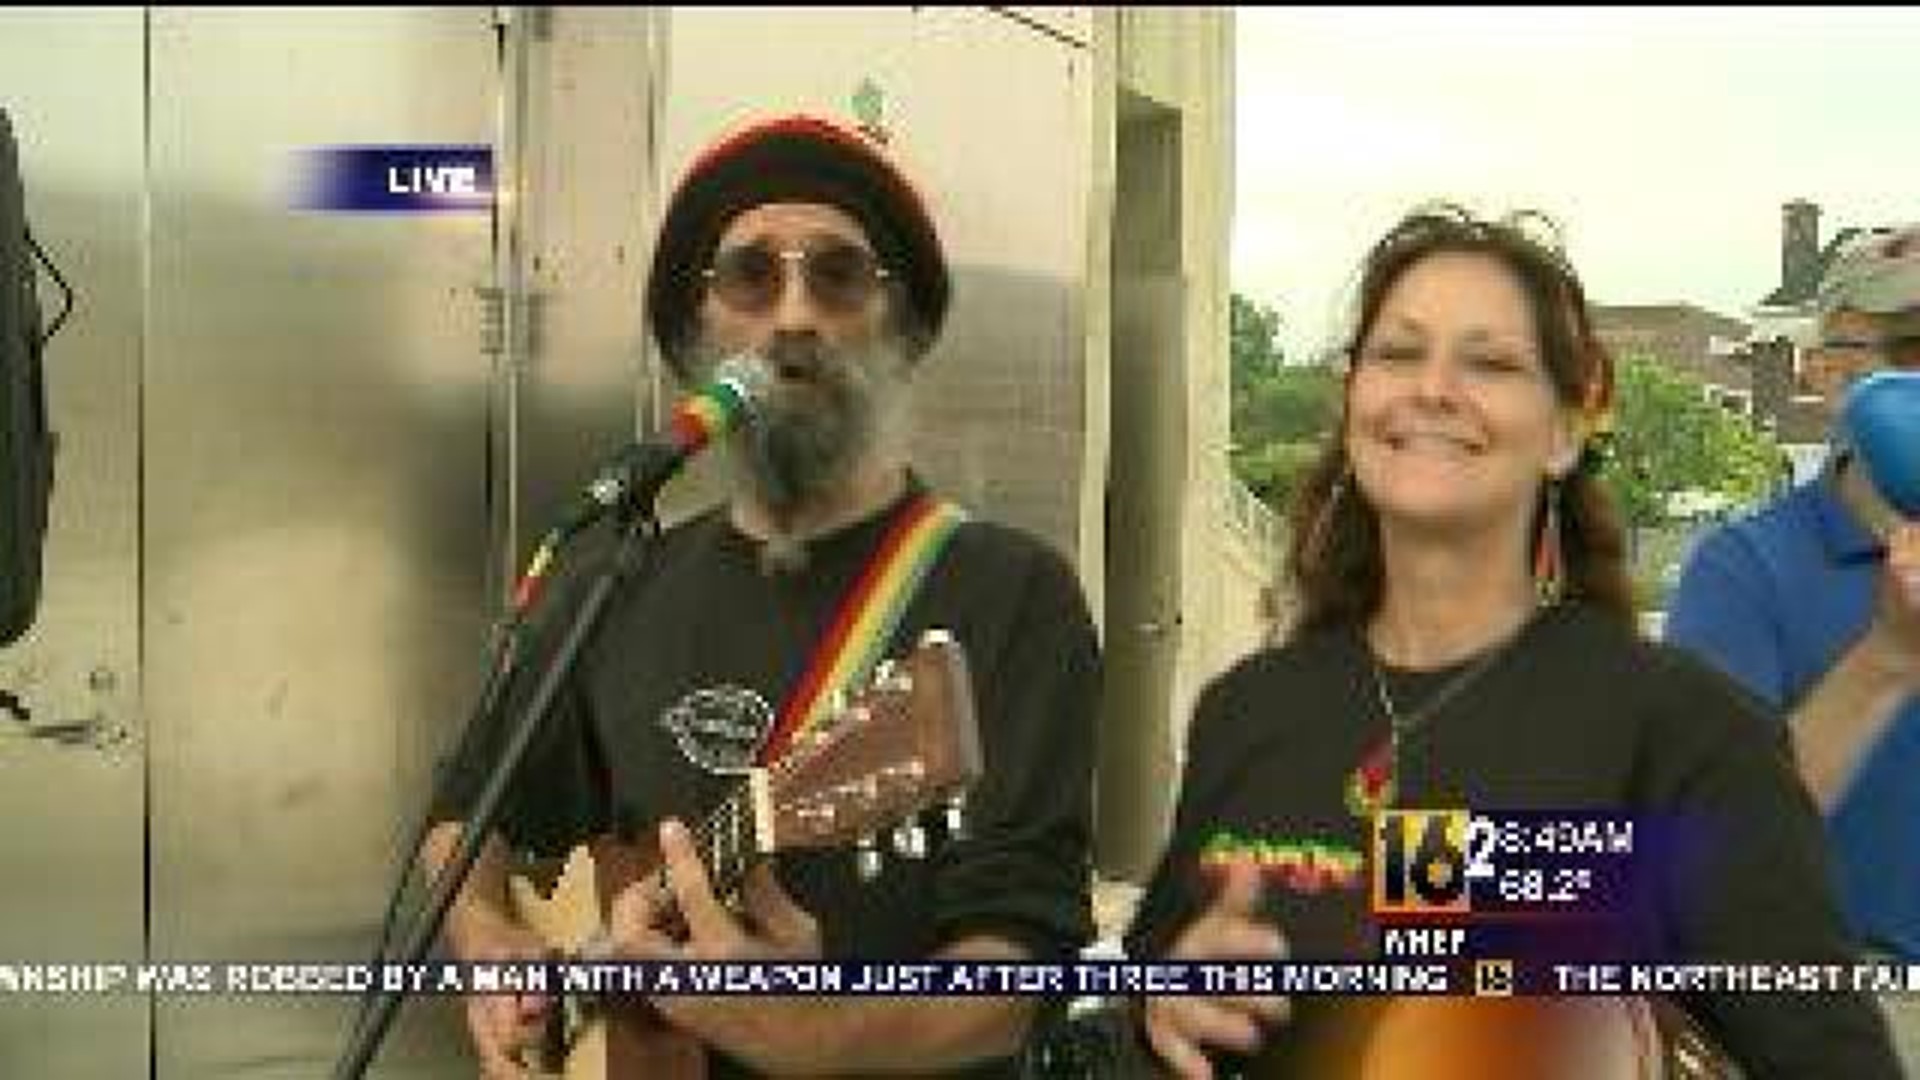 Riverfest: Musical Acts